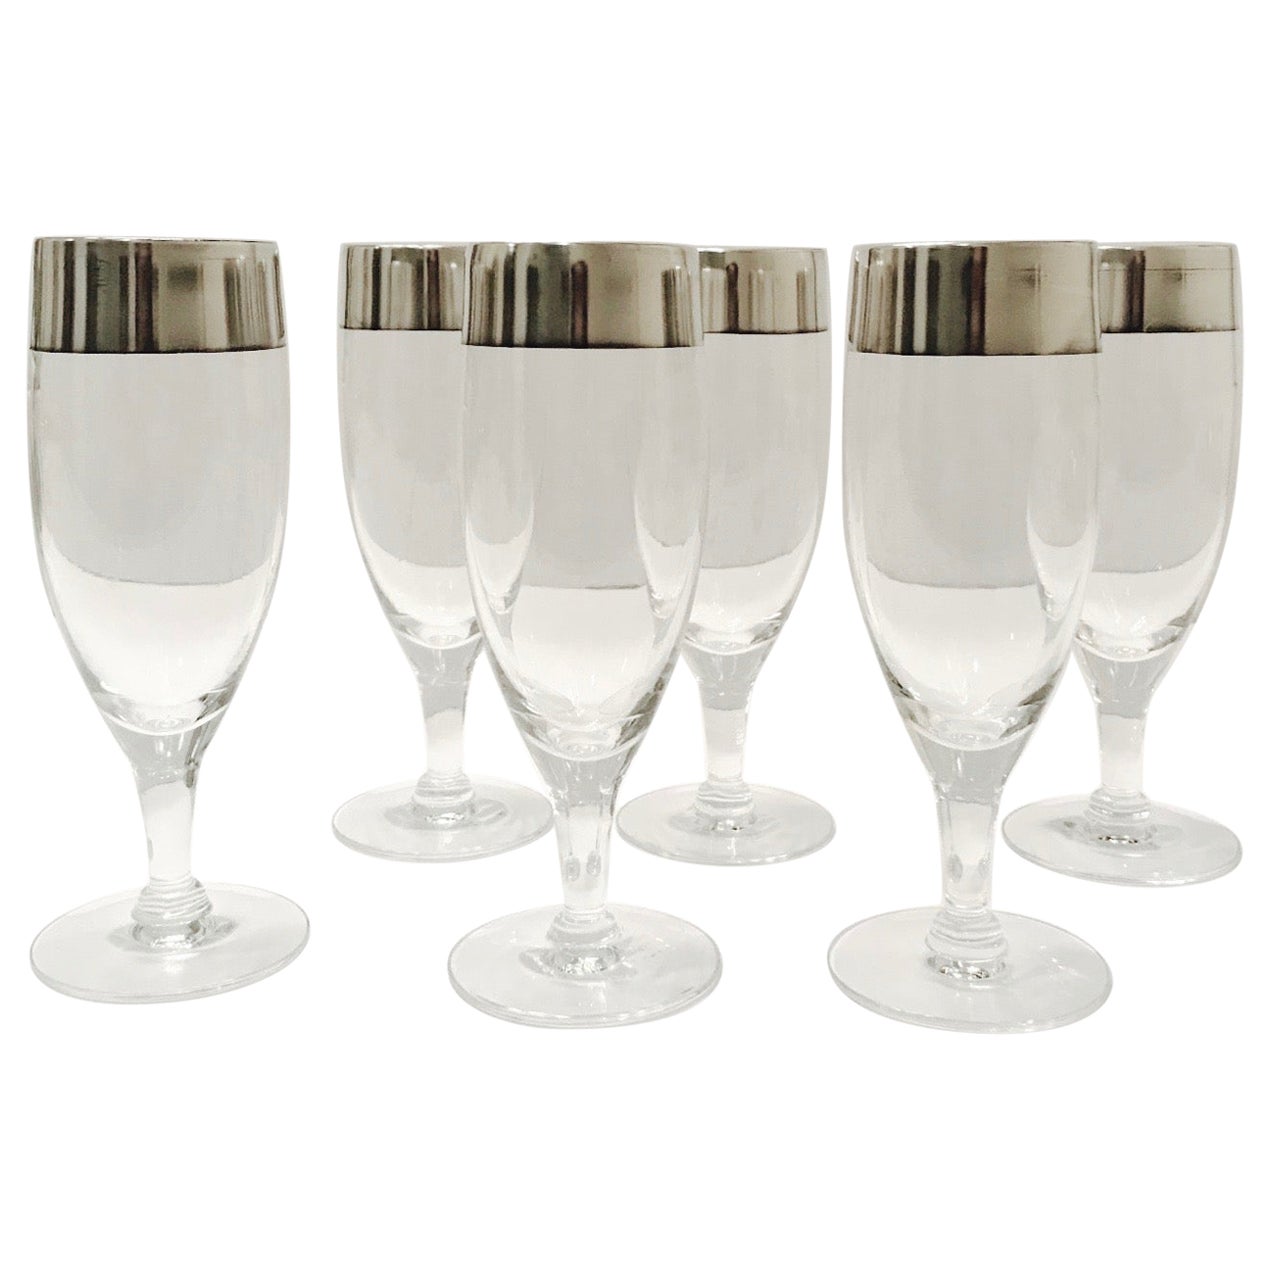 1950's Champagne Flutes with Sterling Silver Overlay by Dorothy Thorpe, Set of 6